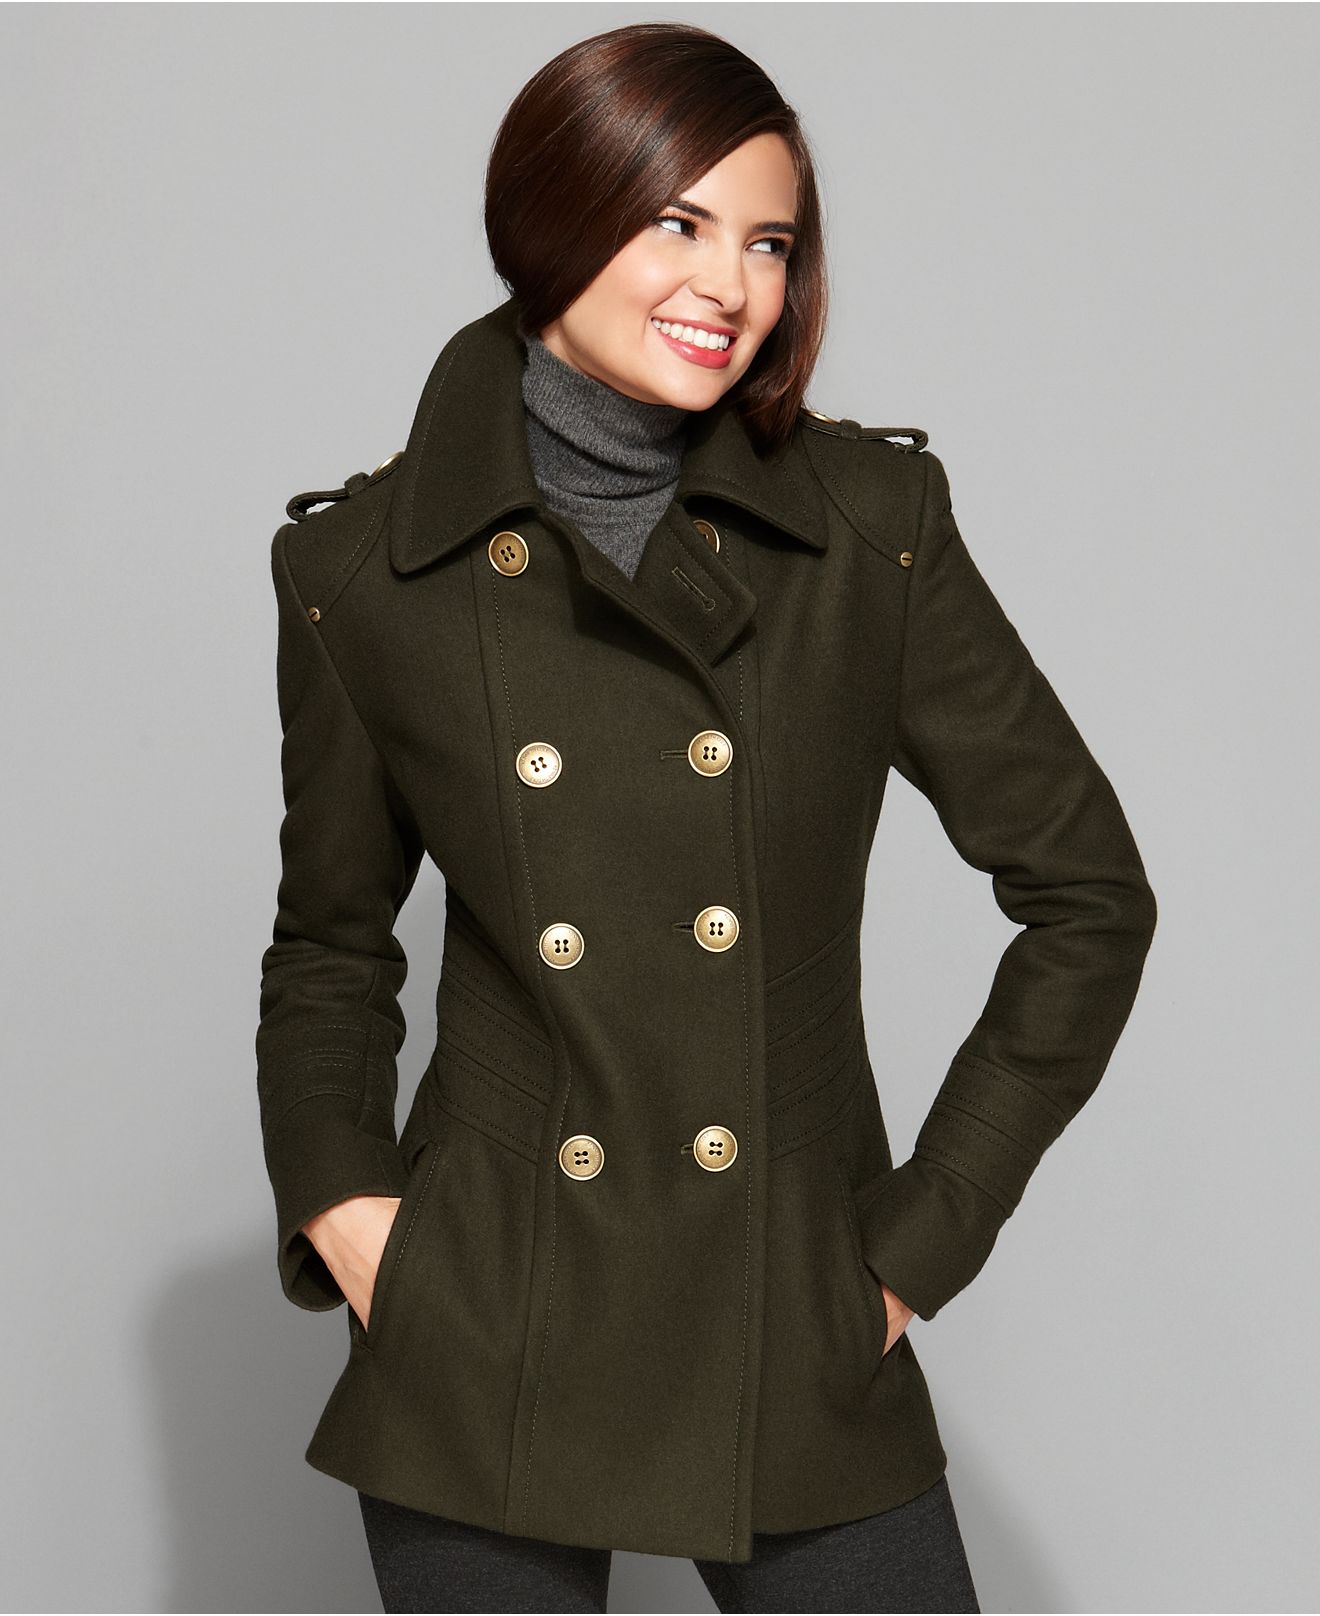 Images of Pea Coats For Women On Sale - Reikian